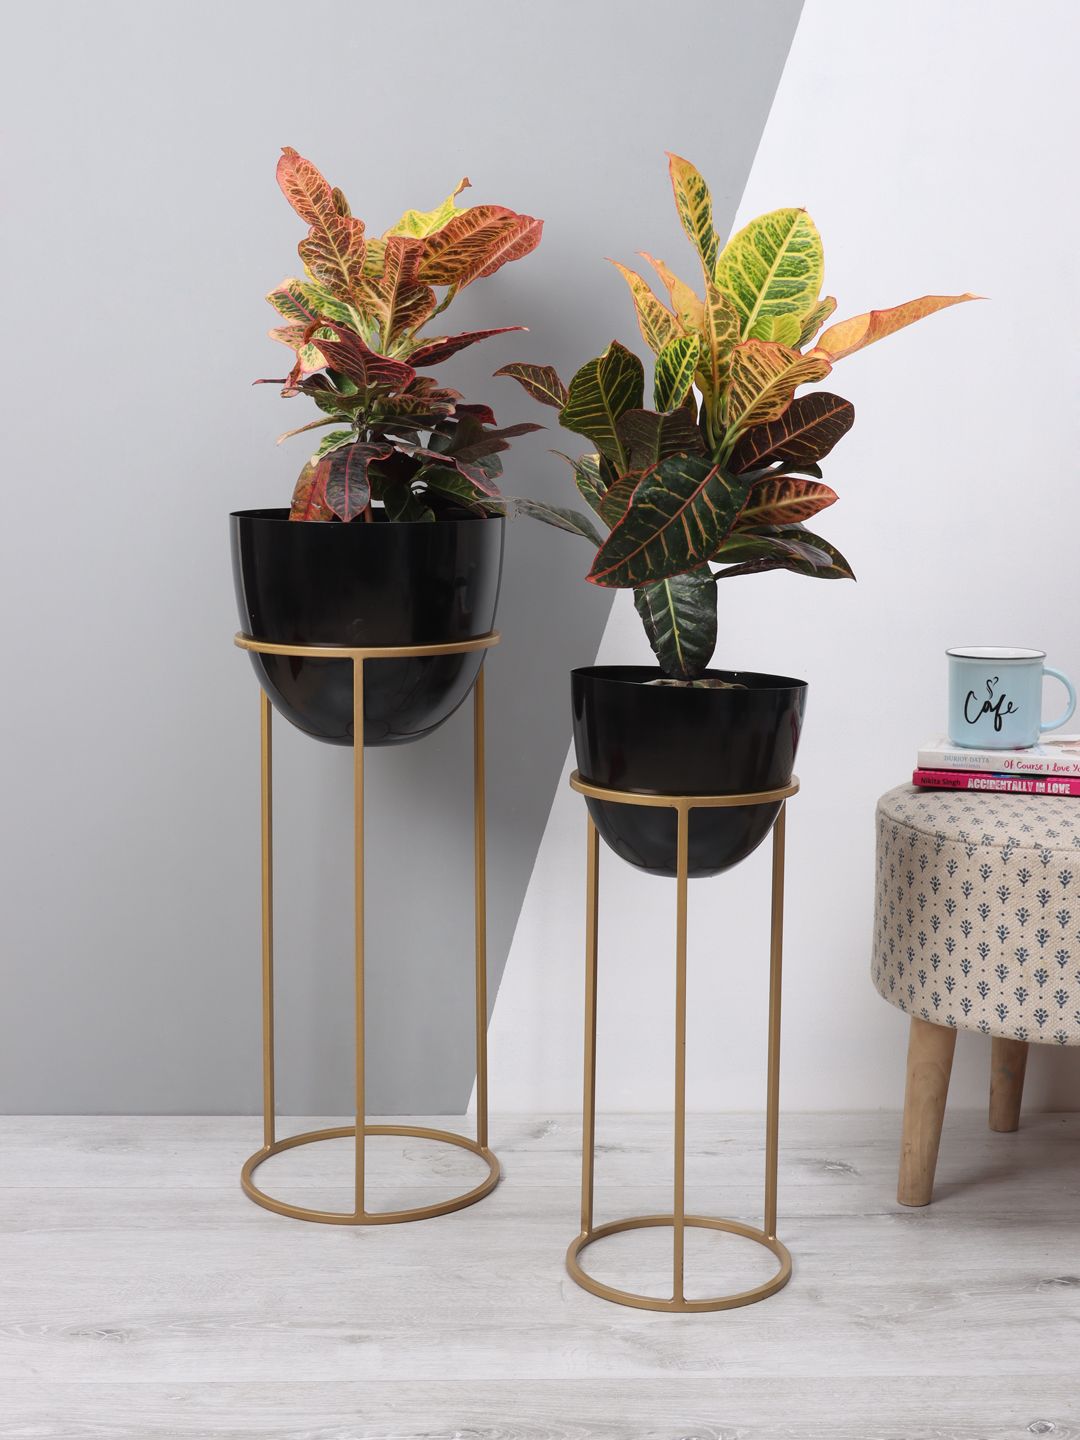 Aapno Rajasthan Set Of 2 Copper-Toned & Black Handcrafted Metal Planters With Stand Price in India